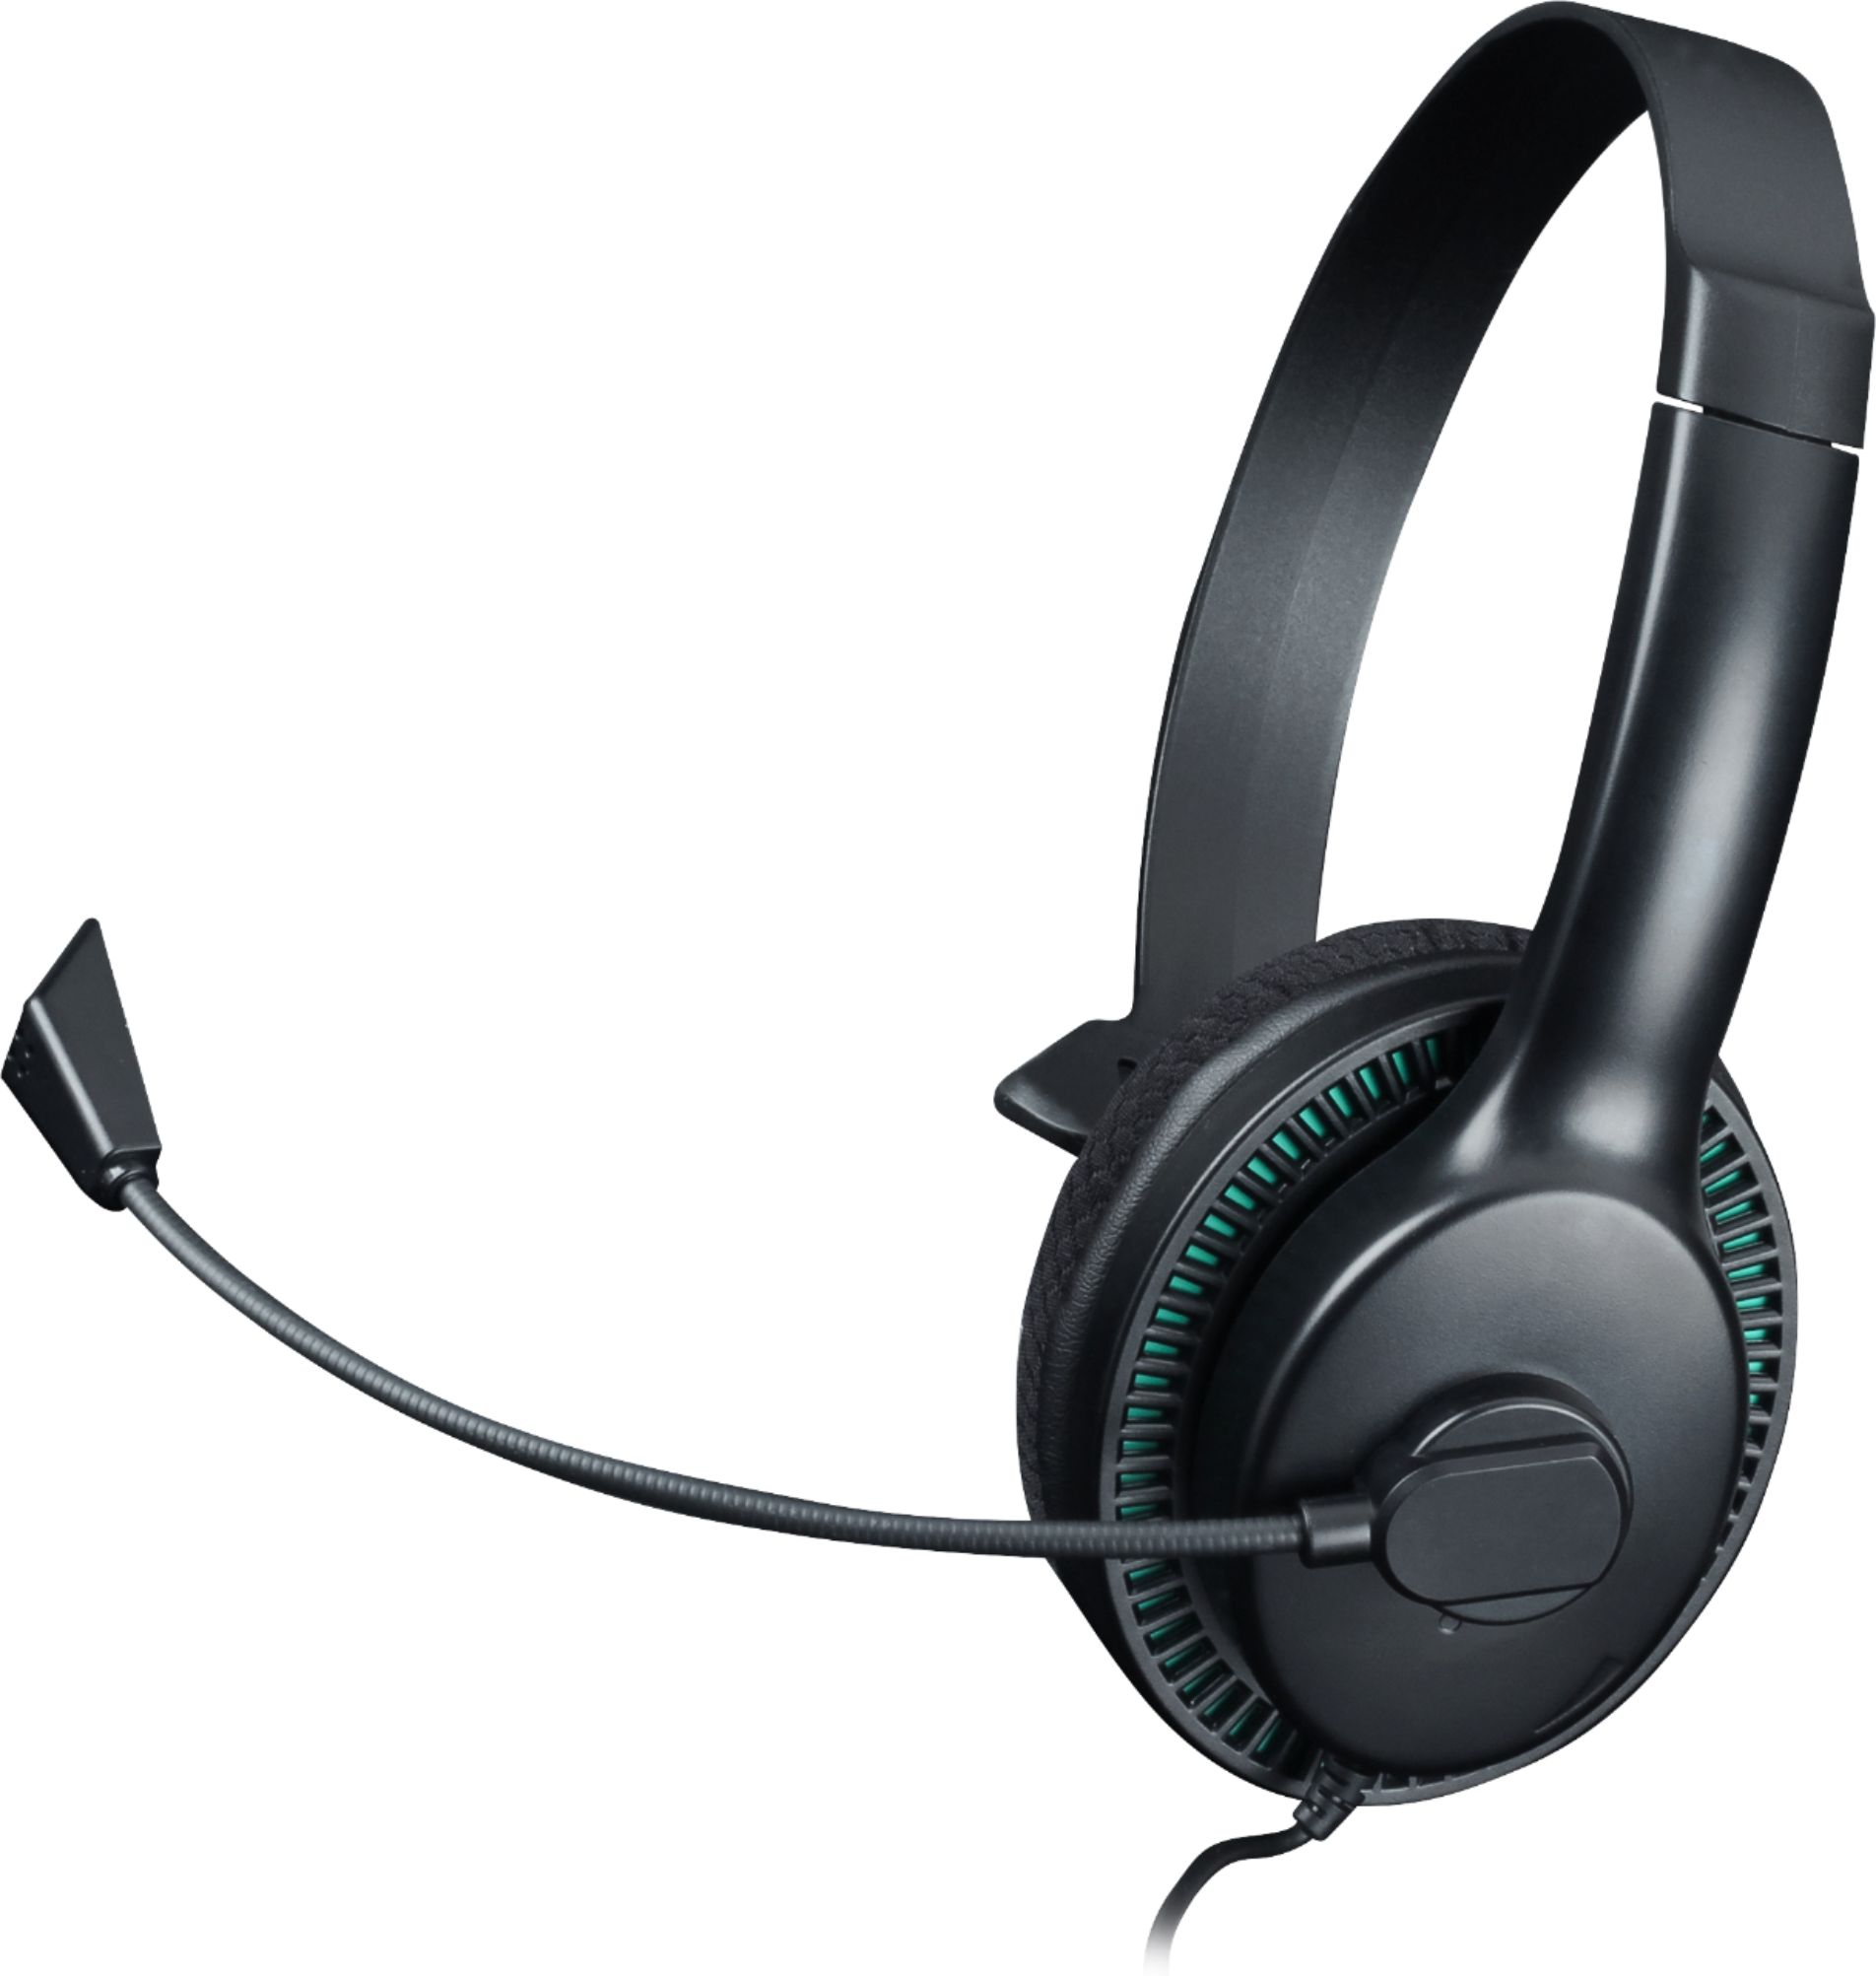 xbox one wired chat headset